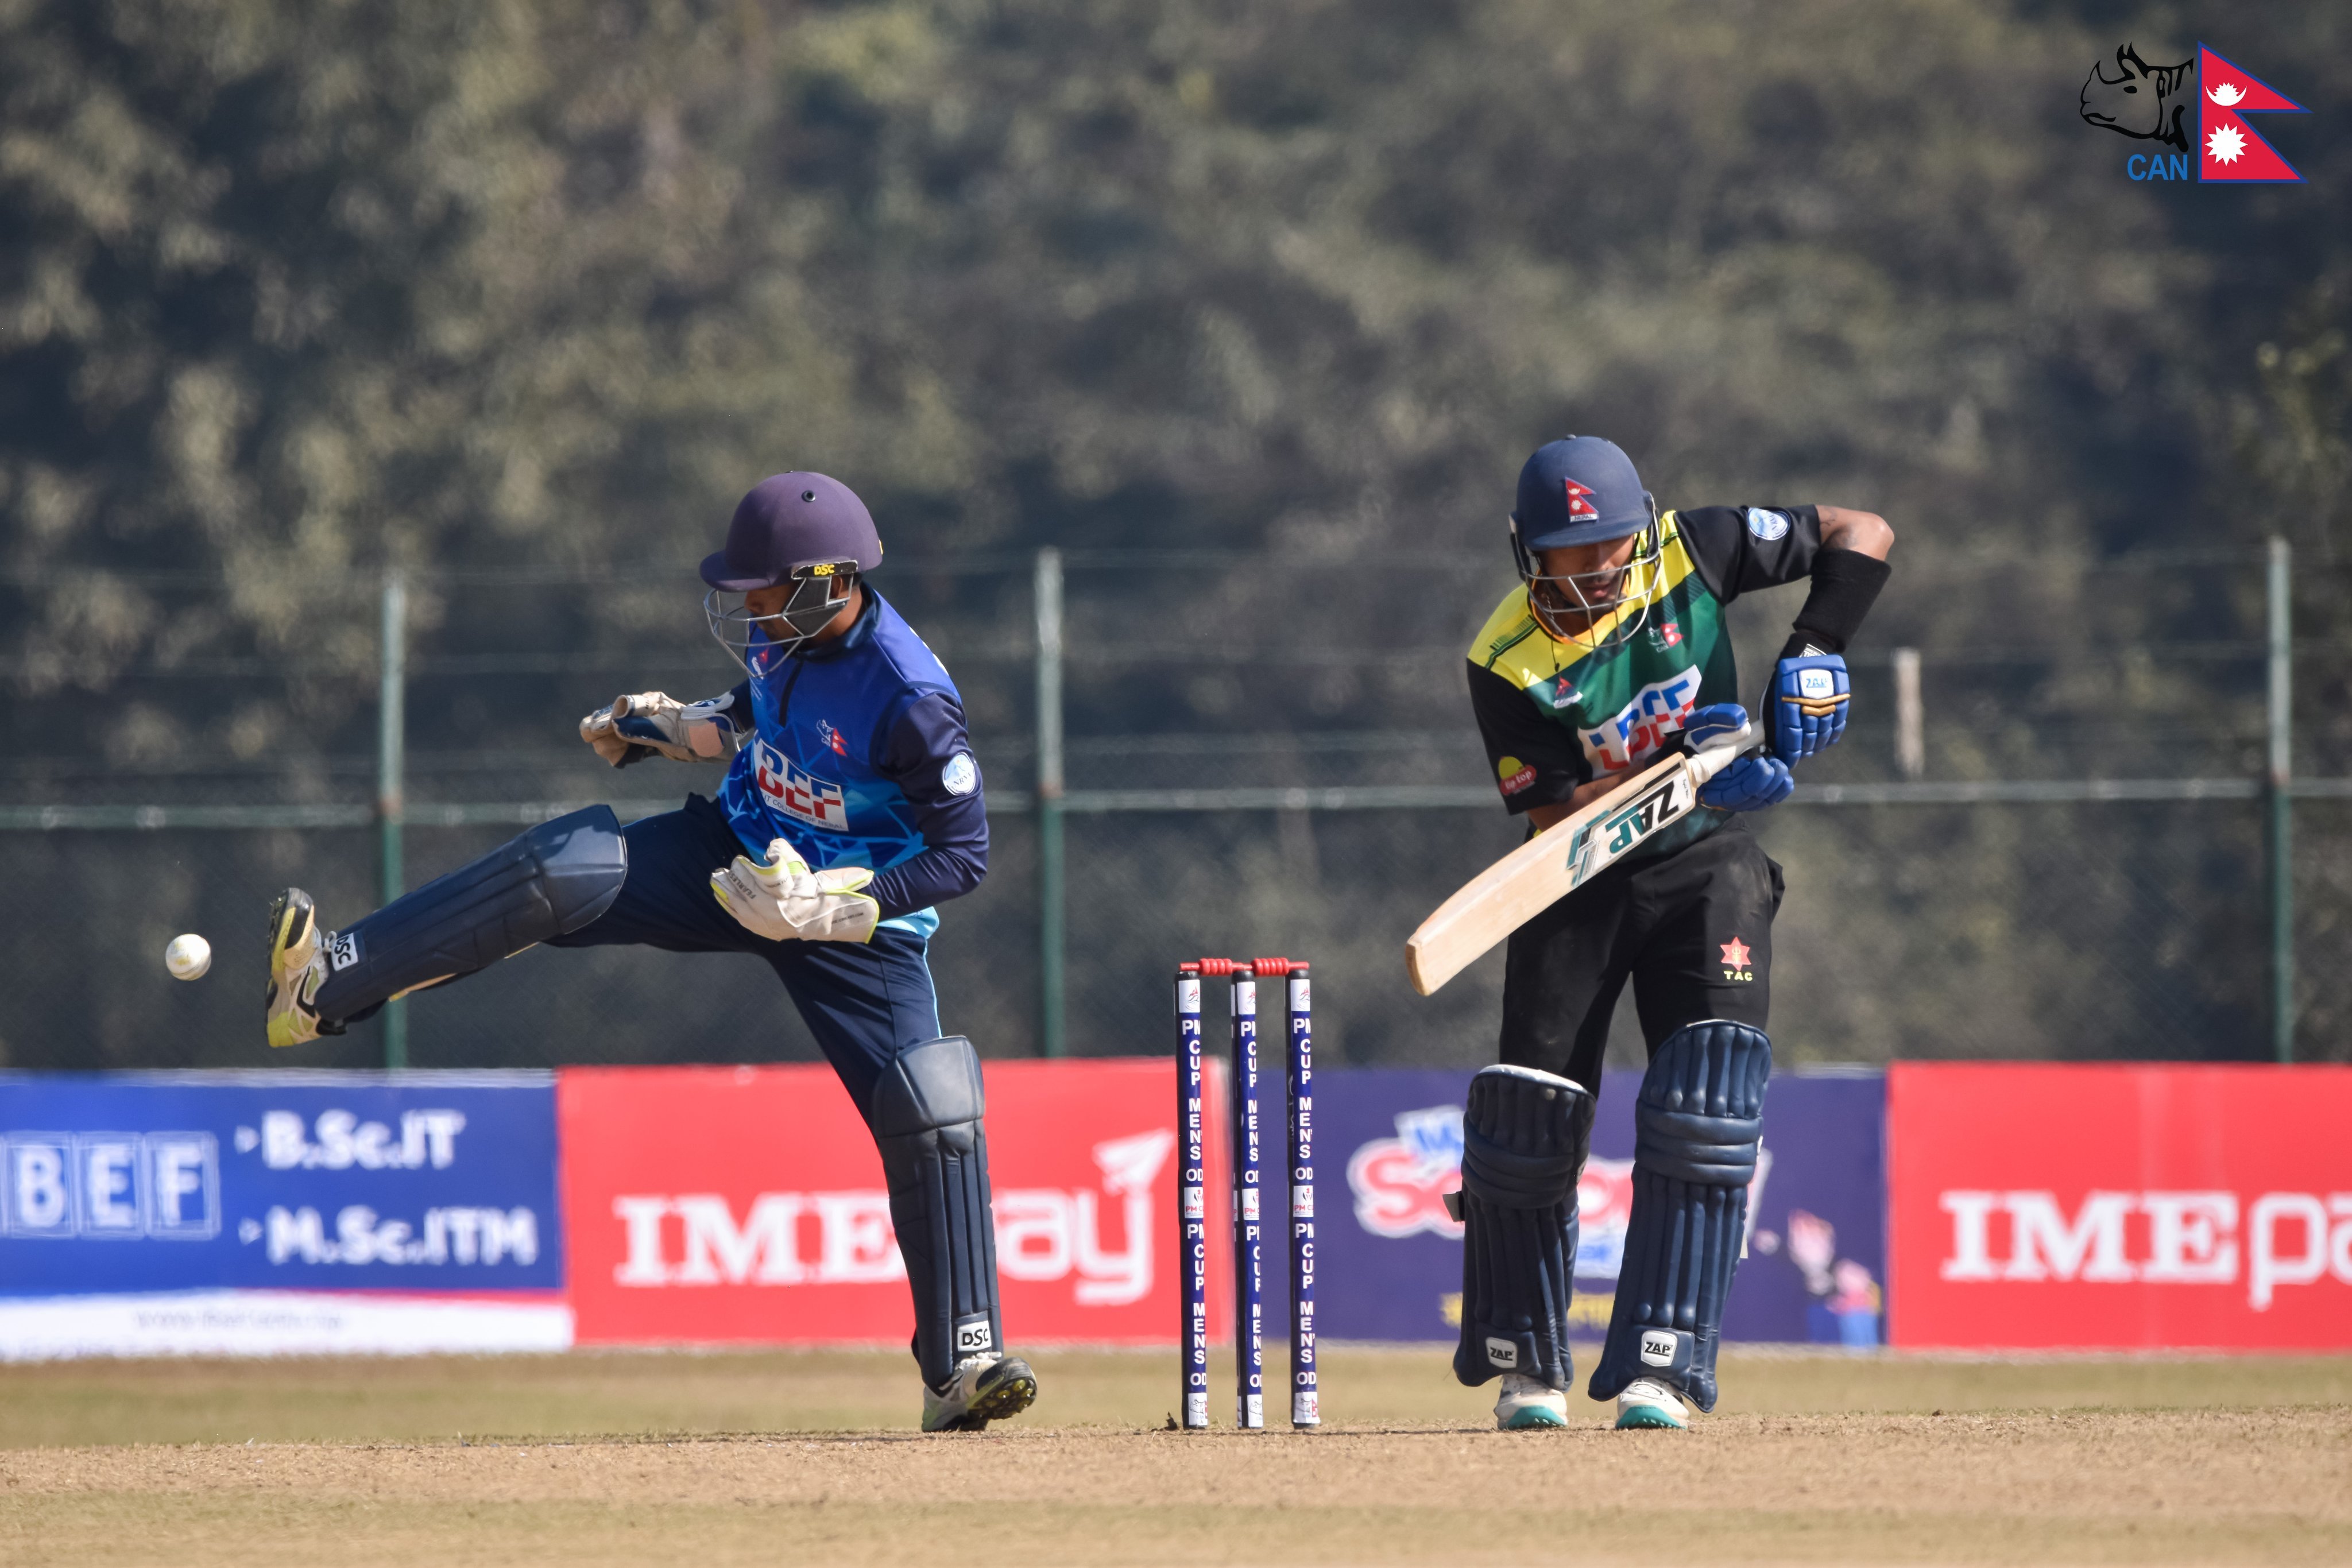 PM Cup Cricket: Tribhuvan Army sets a modest 98-run target for Bagmati Province (with photos)